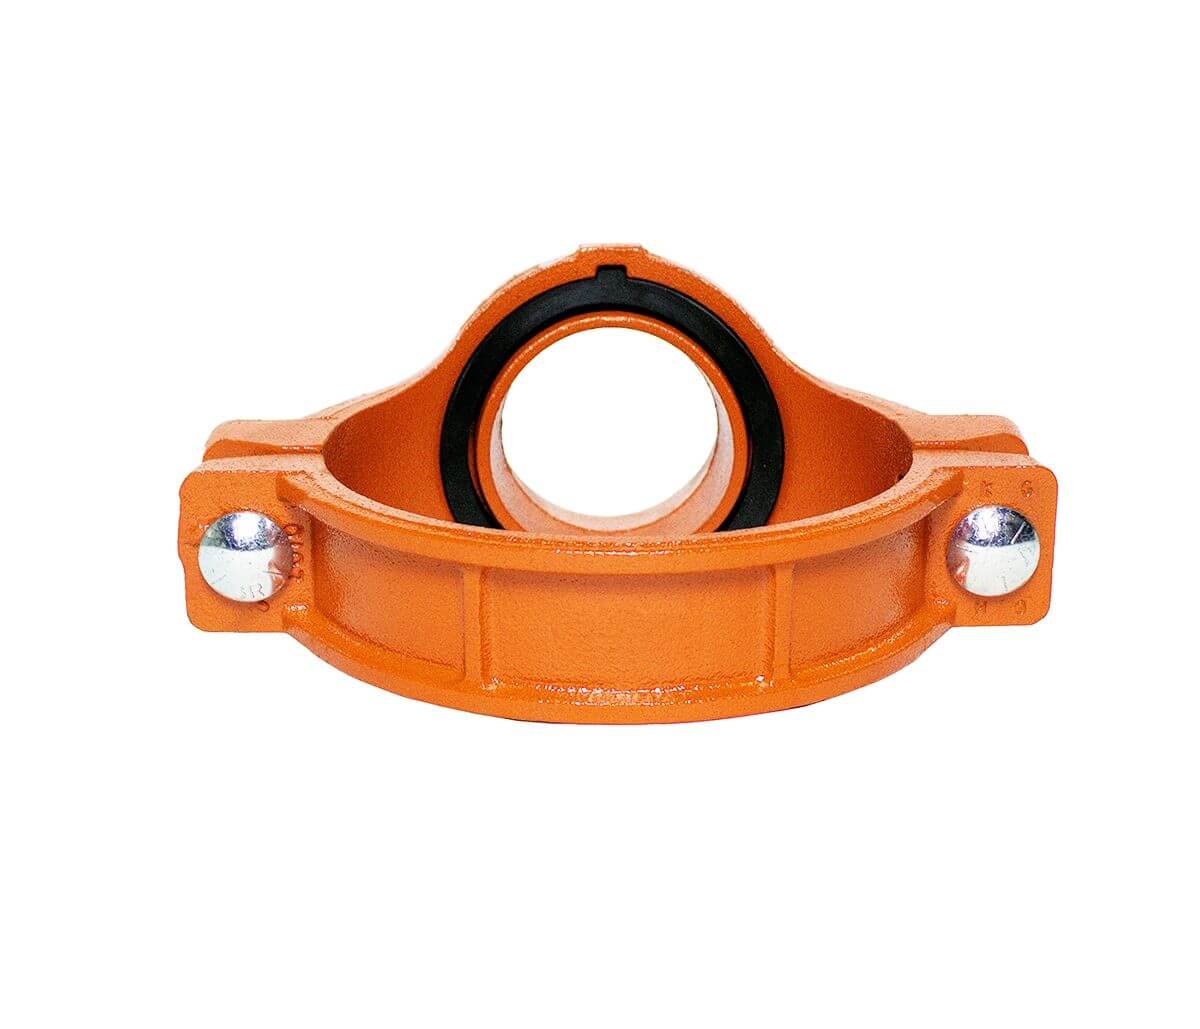 Clamp-T with grooved Mechanical Tee Ductile Iron Class 150 EPDM Seal Orange